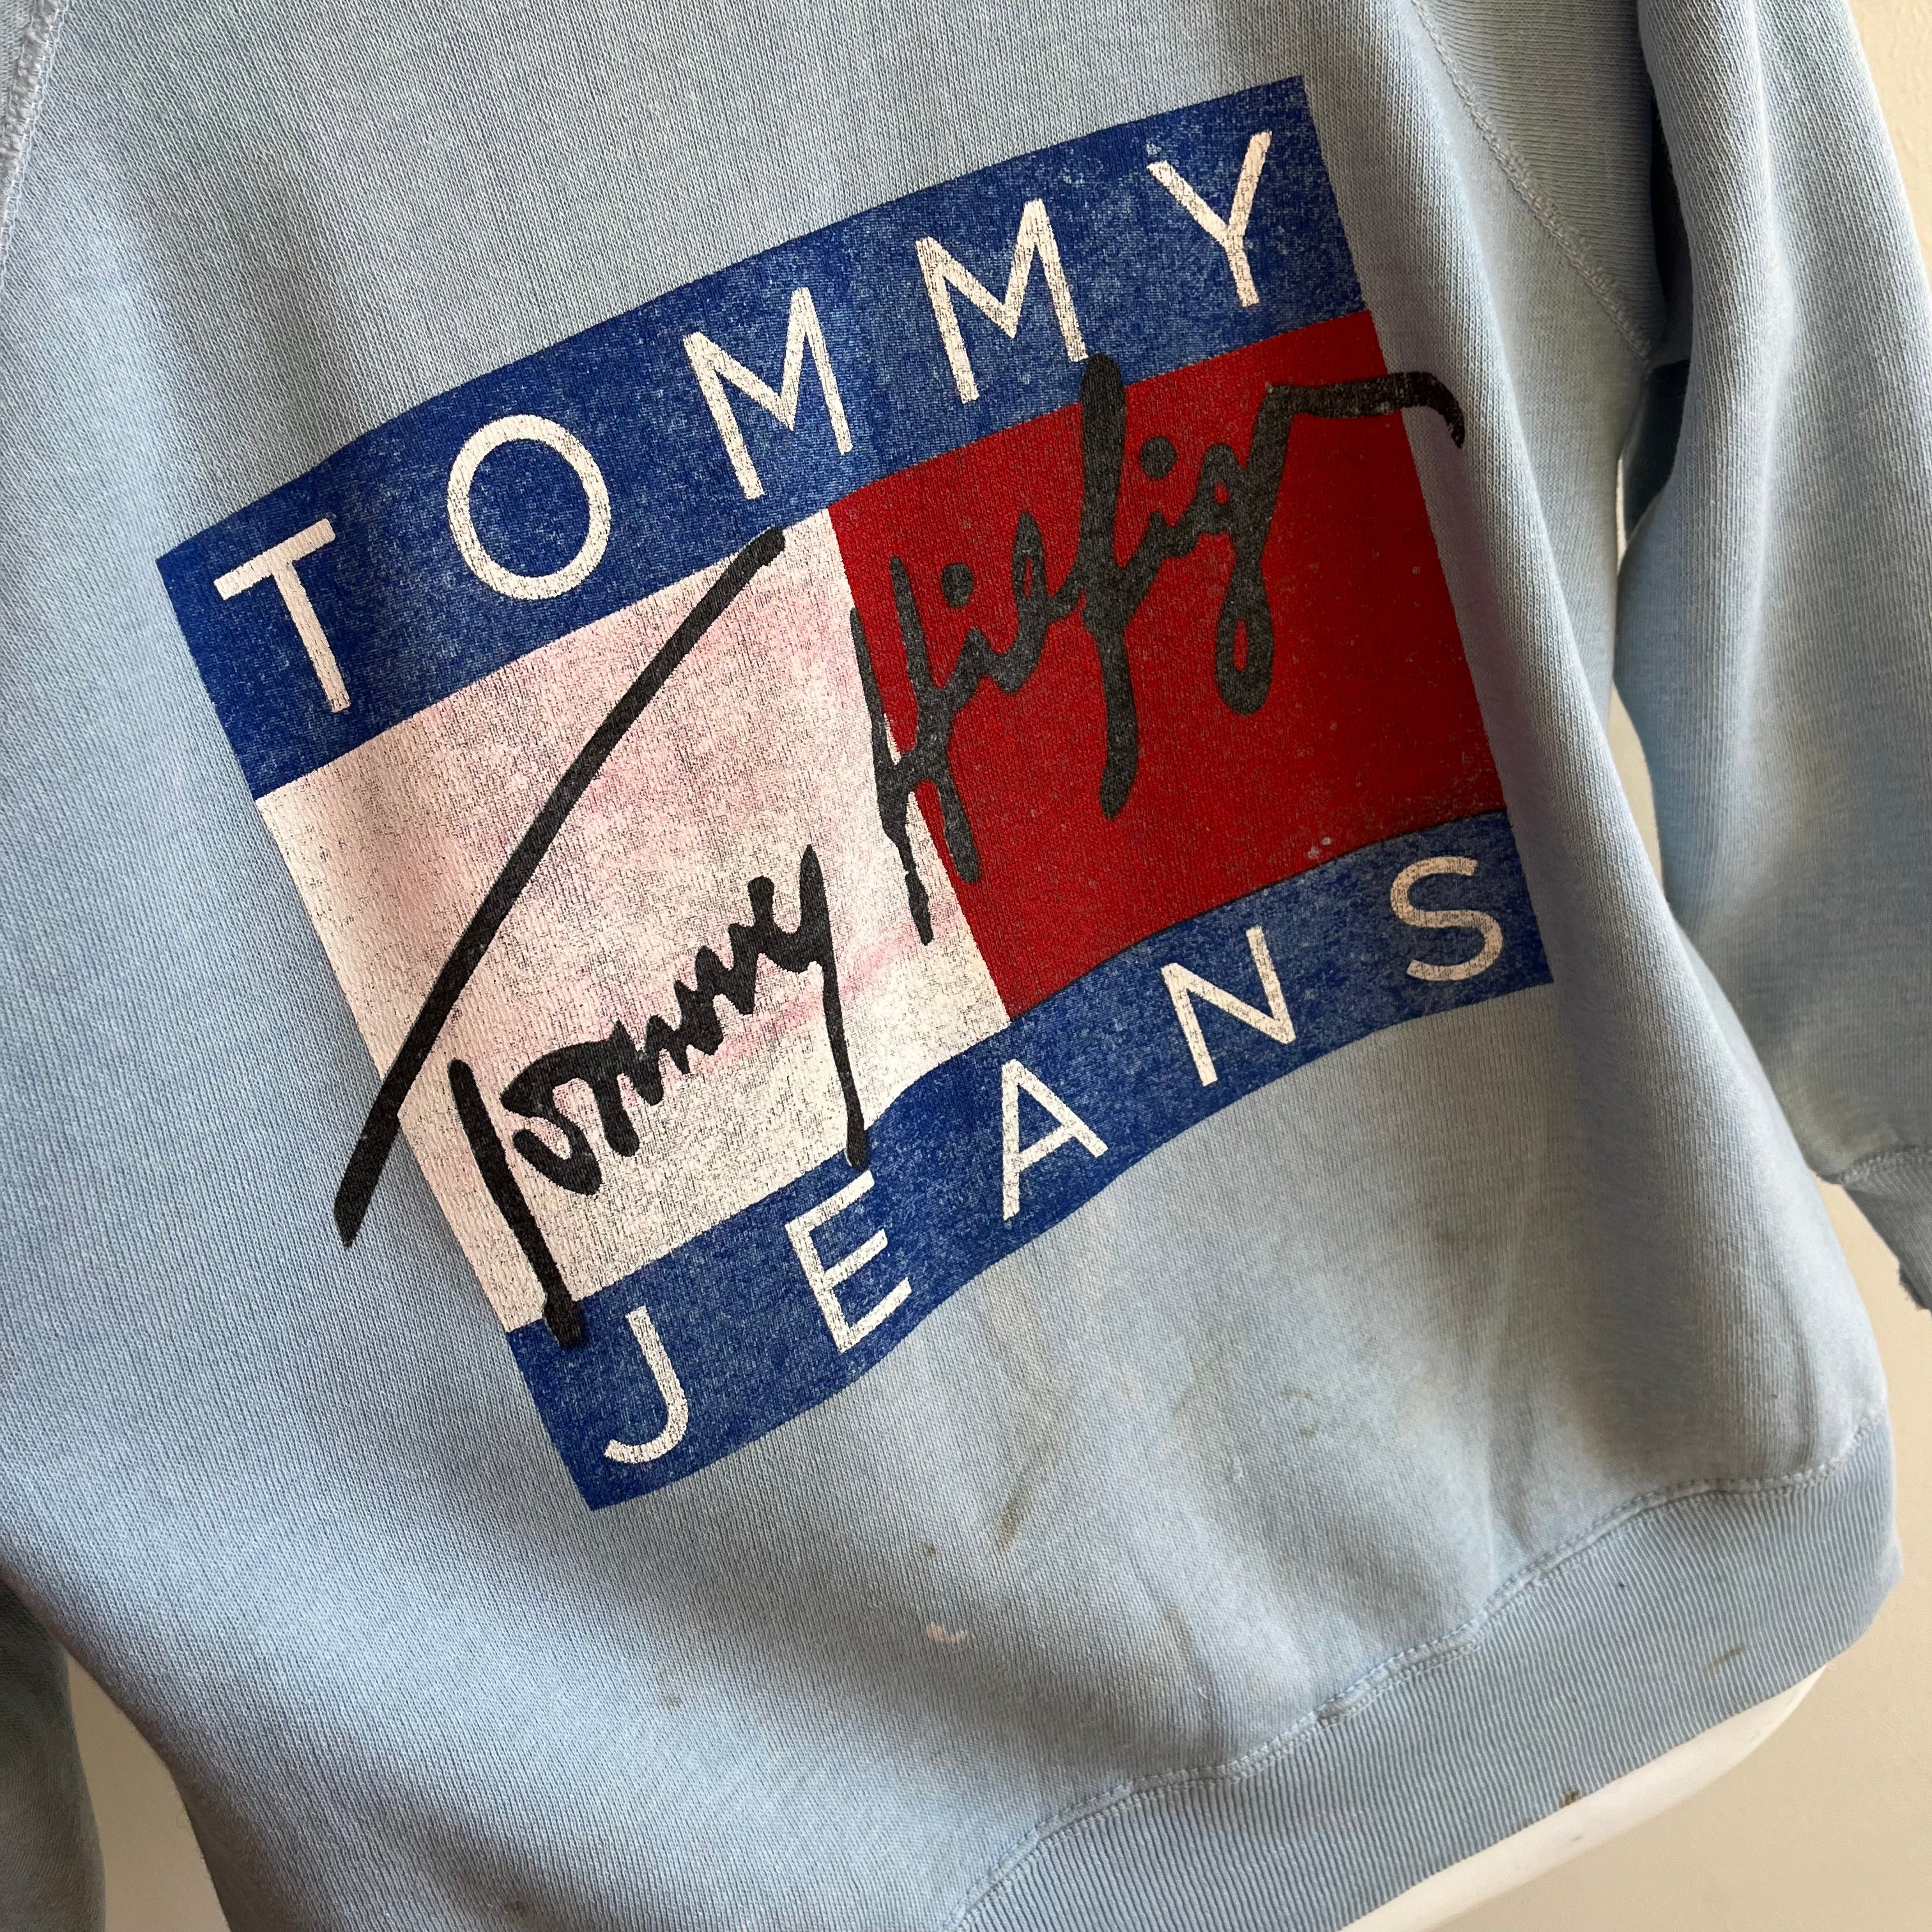 1980s Very Stained Tommy Raglan